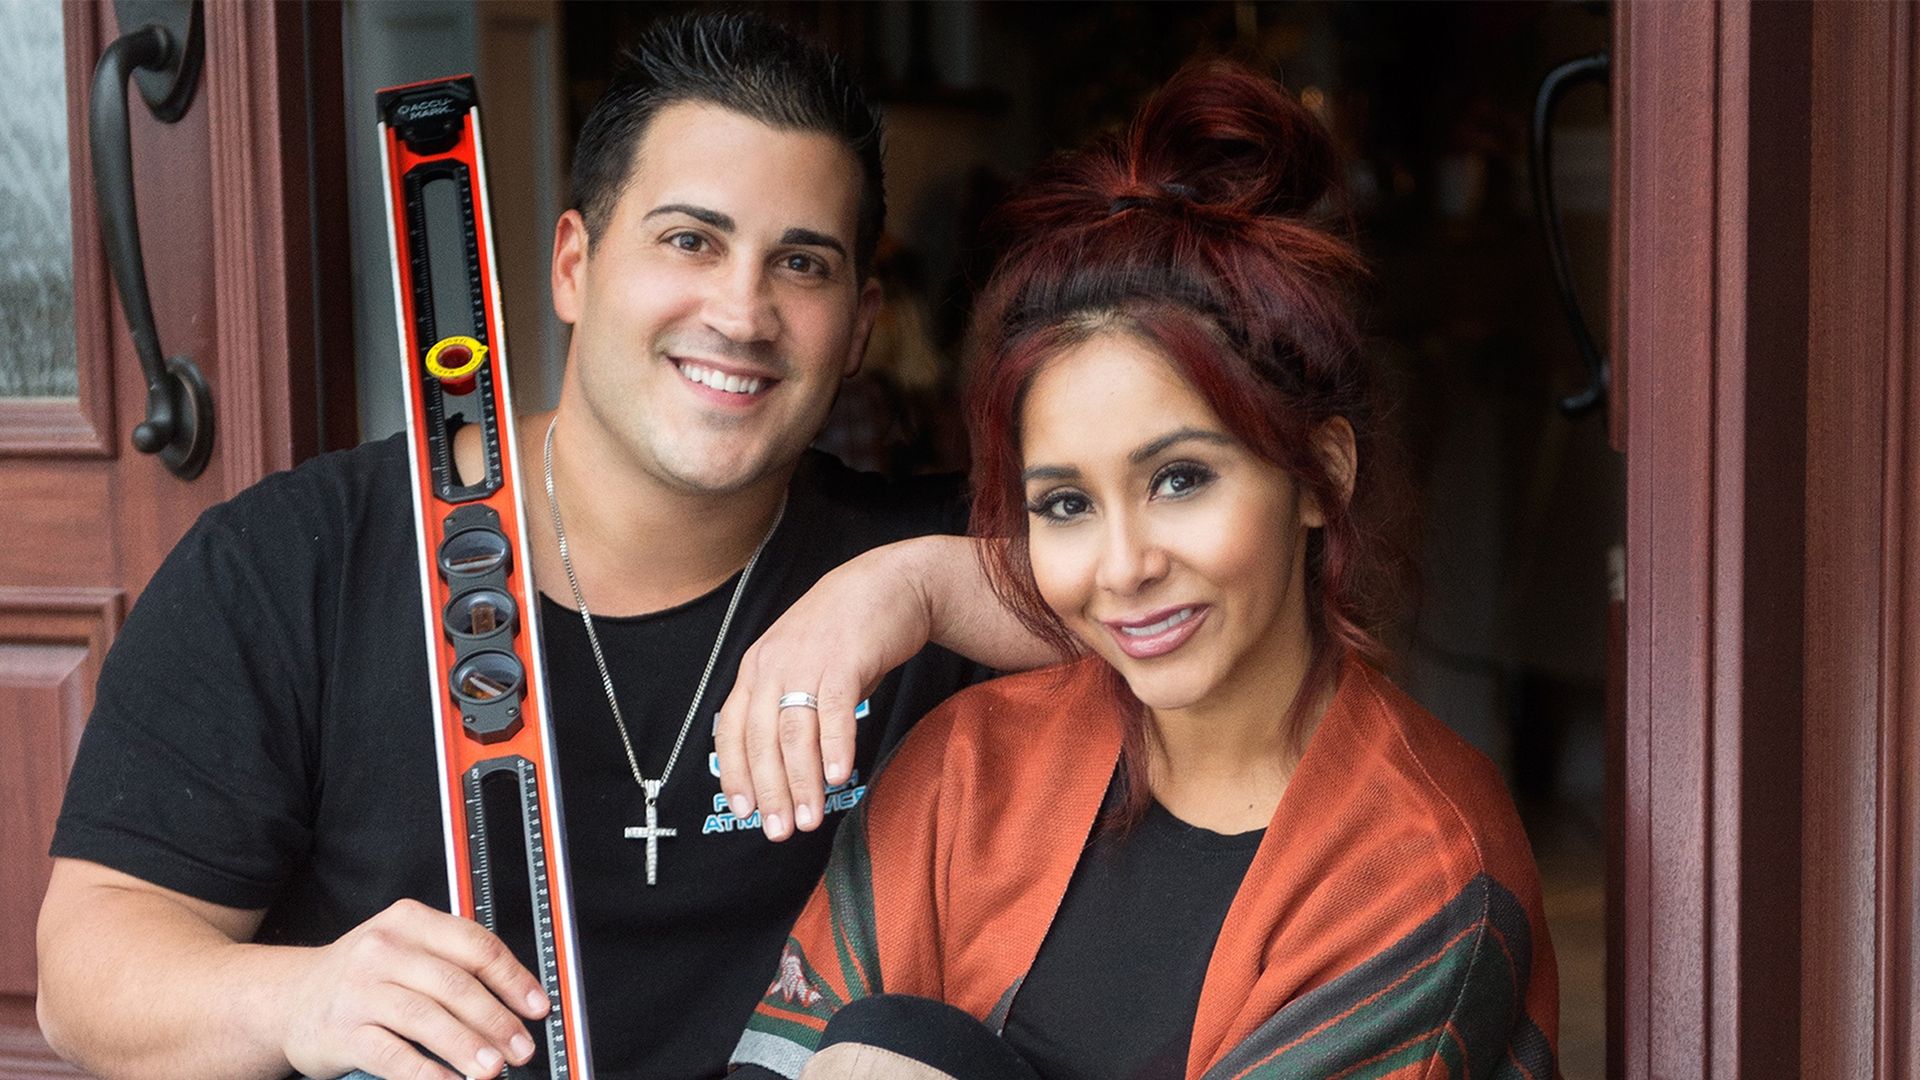 About Nicole Polizzi's husband Jionni LaValle: Net Worth, Height